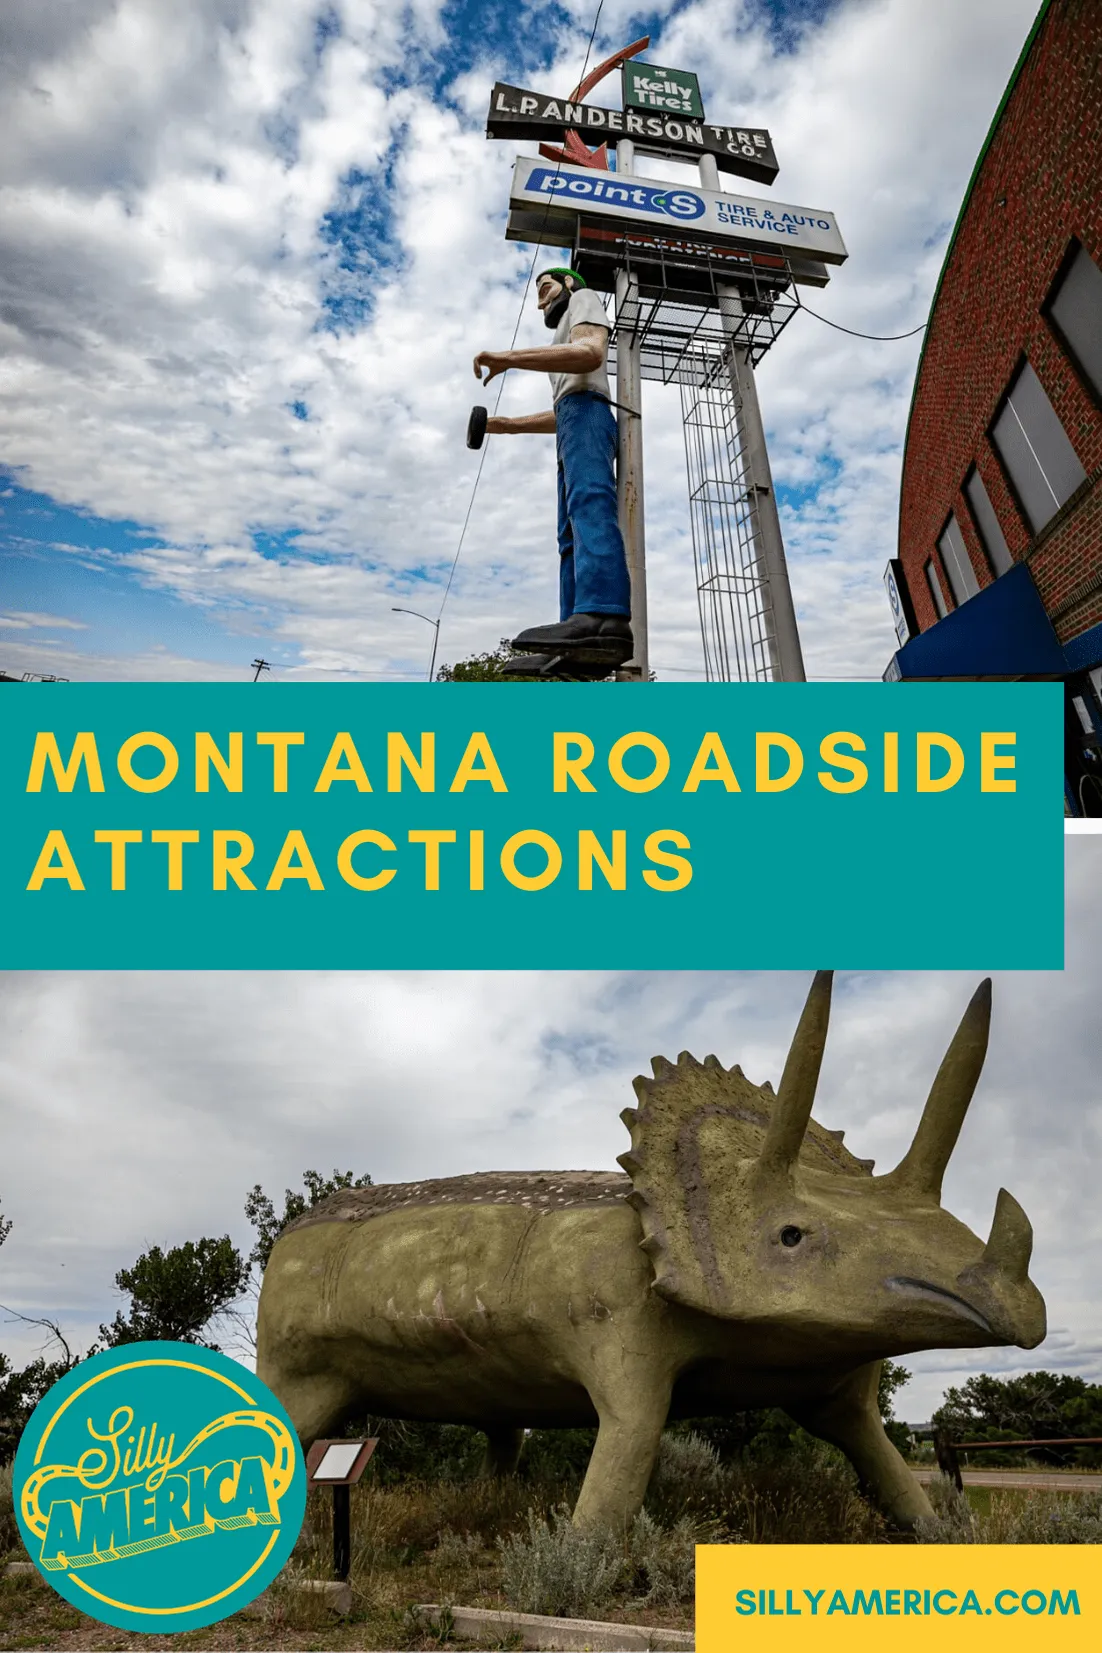 The best Montana roadside attractions to visit on a Montana road trip. Add these roadside oddities to your travel bucket list, itinerary, or route map!  #MontanaRoadsideAttractions #MontanaRoadsideAttraction #RoadsideAttractions #RoadsideAttraction #RoadTrip #MontanaRoadTrip #MontanaRoadTripMap #MontanaRoadTripItinerary #MontanaRoadTripBucketLists #MontanaBucketList #MontanaRoadTripIdeas #MontanaWinterRoadTrip #MontanaRoadTripWithKids #MontanaRoadWithKids